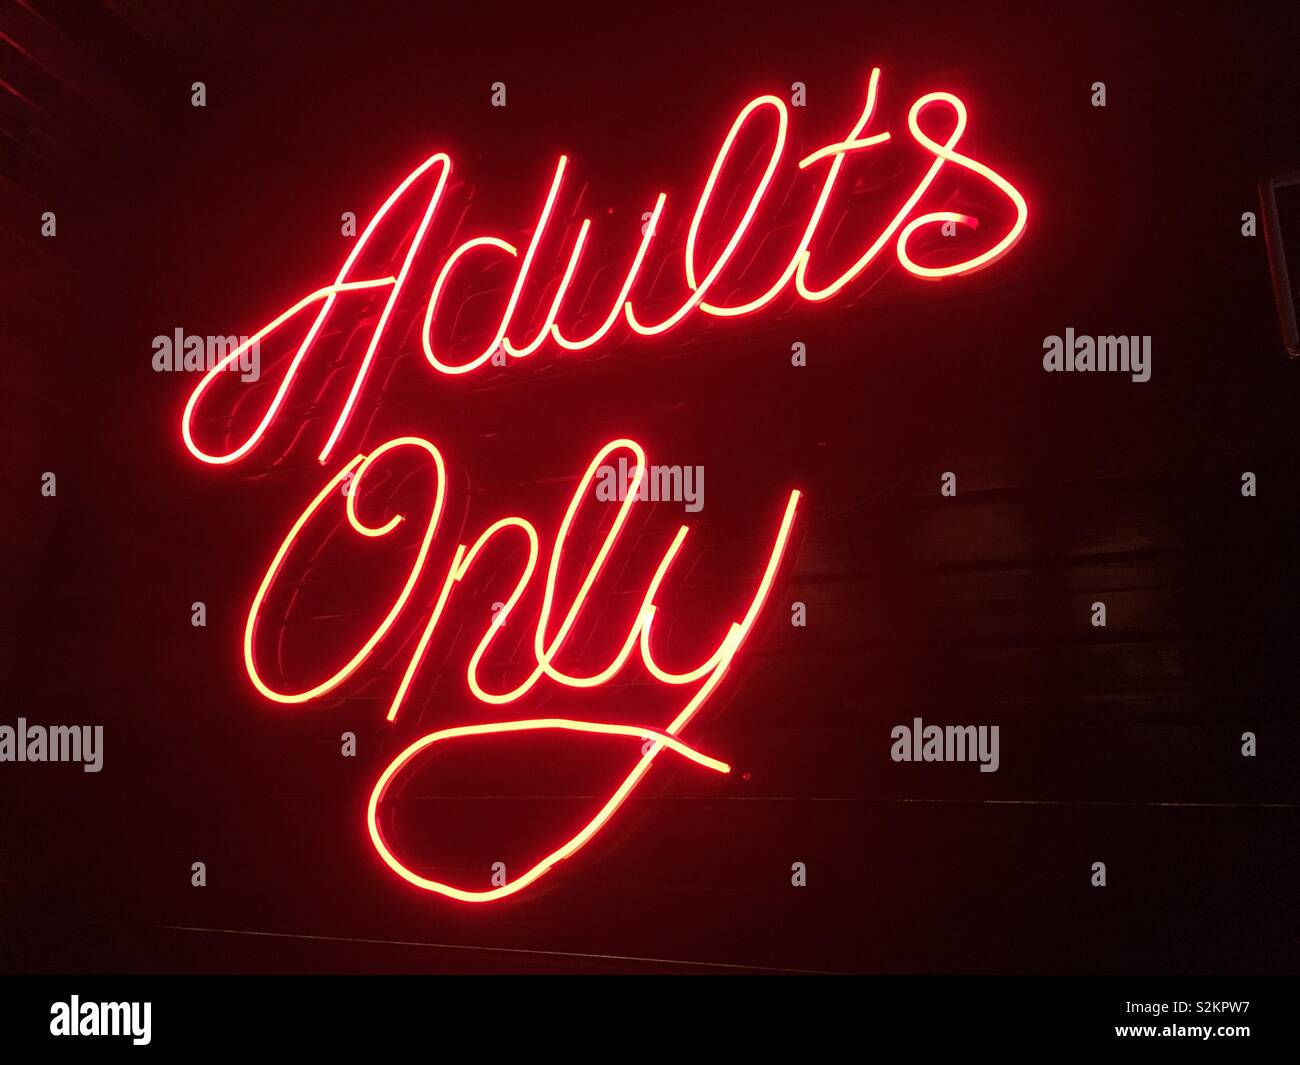 Adults only neon sign Stock Photo